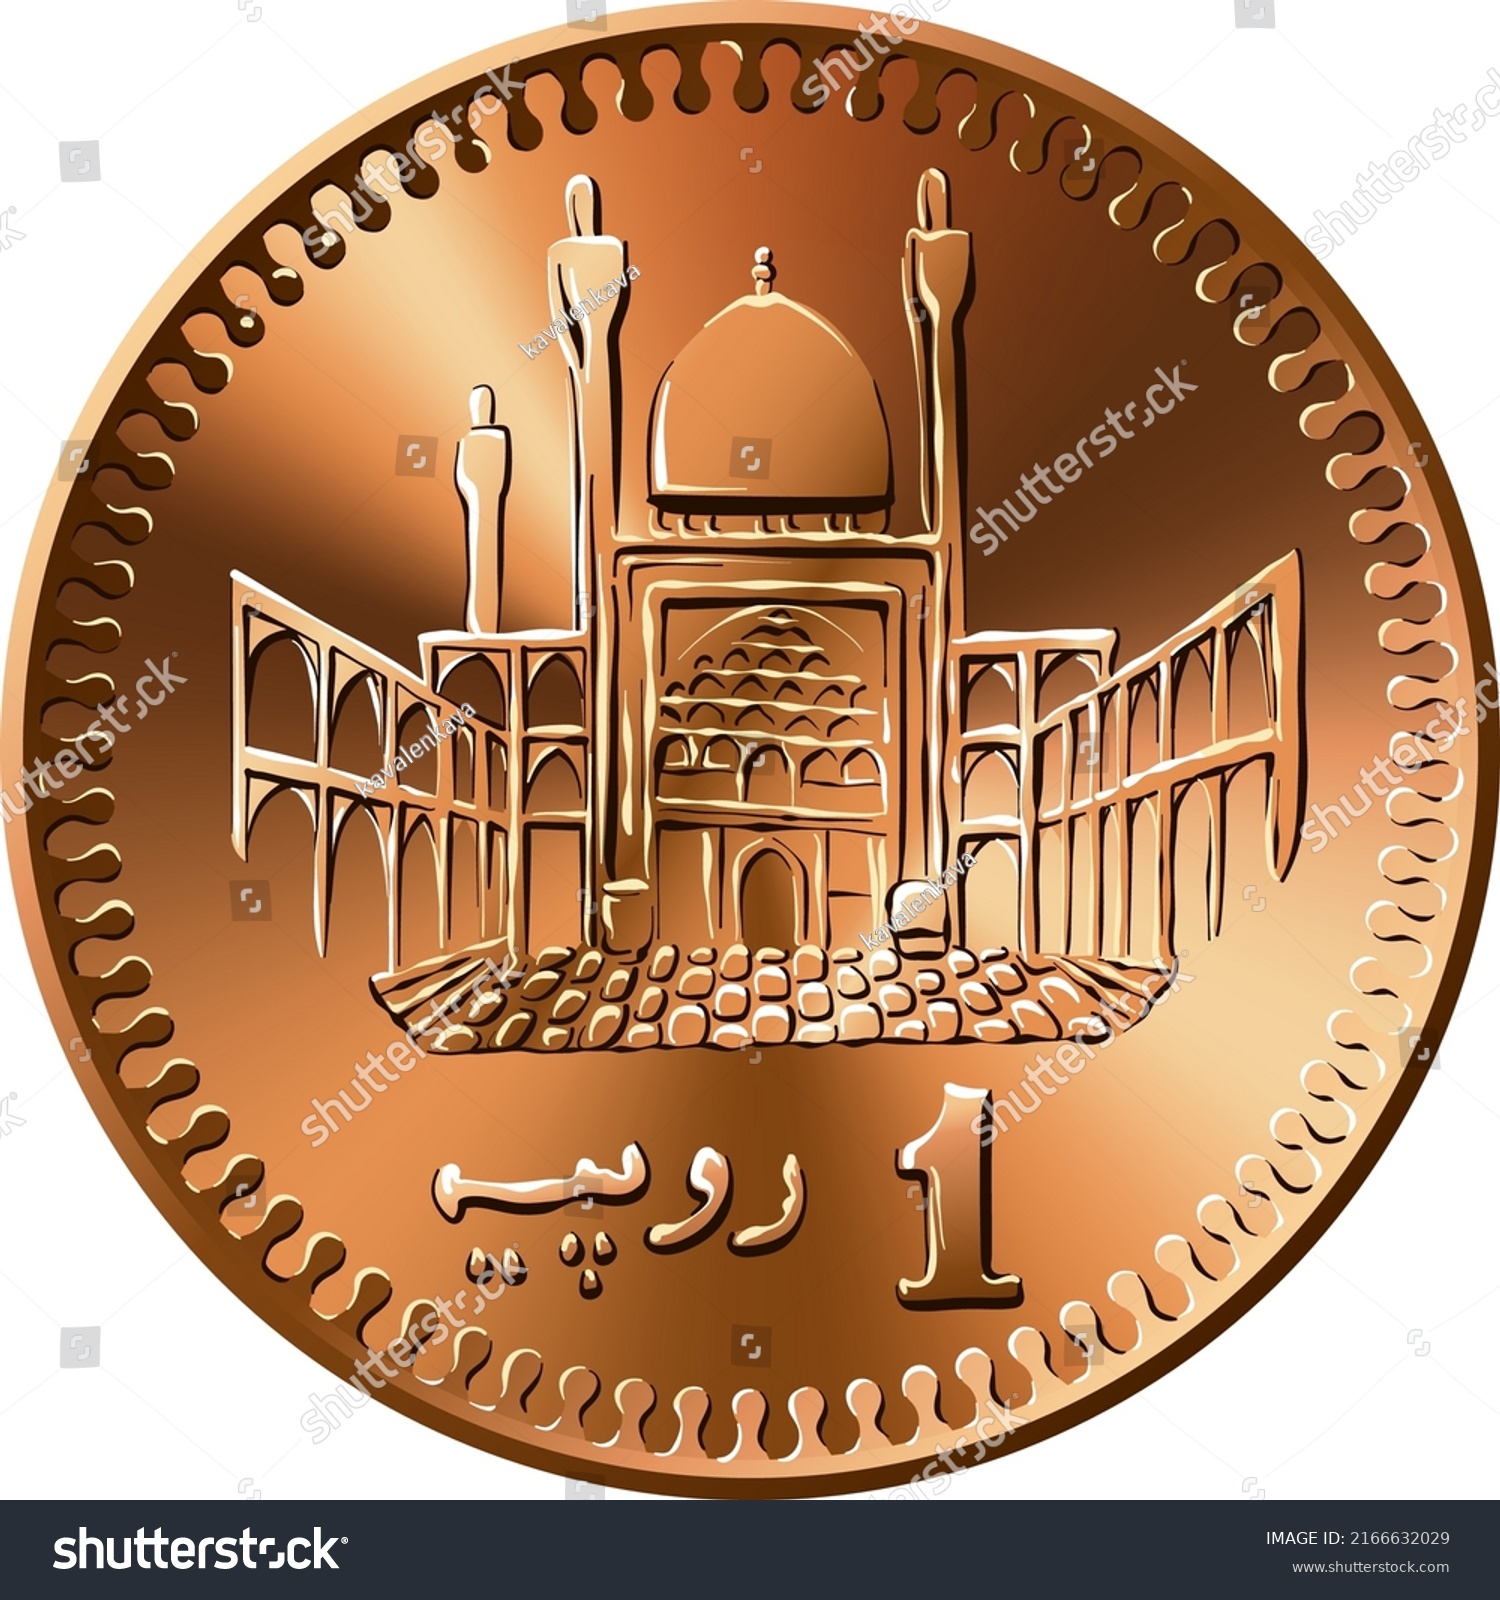 SVG of Shiny gold coin 1 Pakistani rupee, reverse with Shrine of Lal Shahbaz Qalandar svg